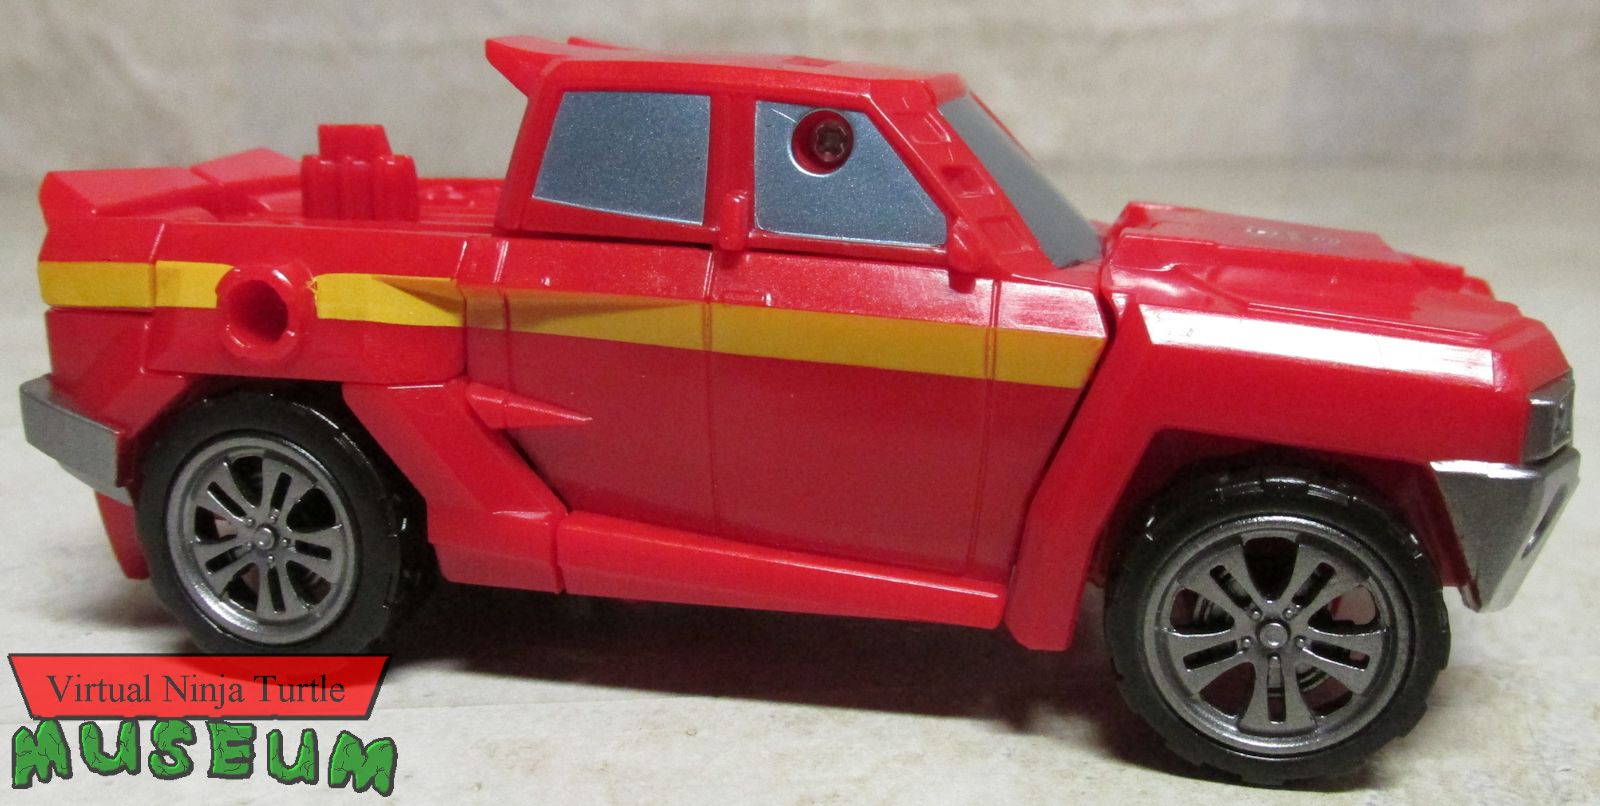 Ironhide vehicle mode side view